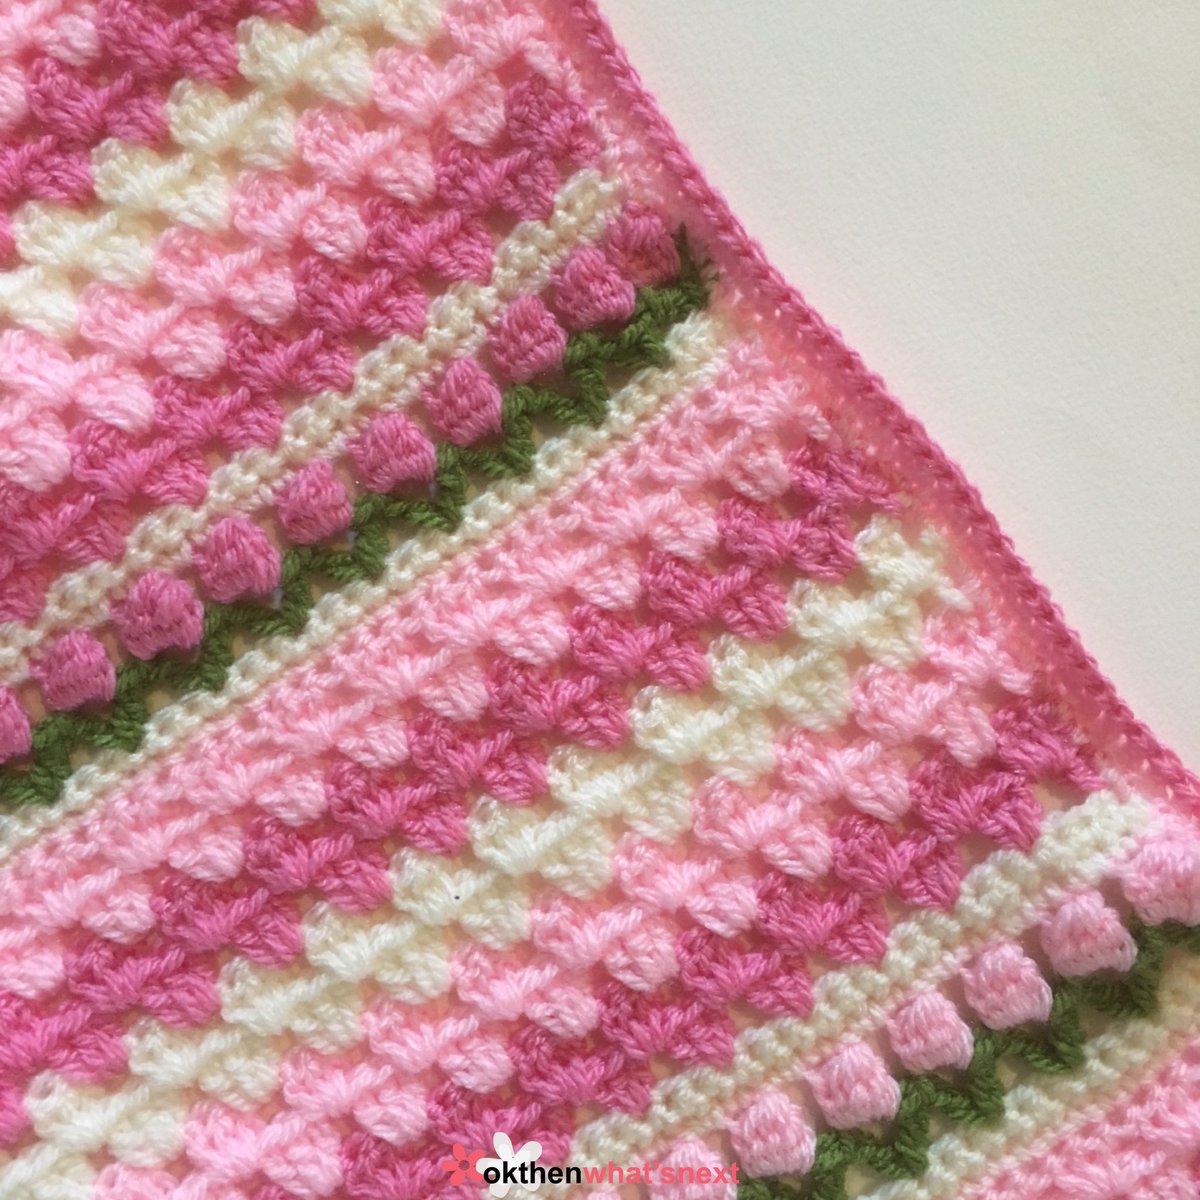 Happy #internationaldayofpink! 💕 How could I not share my tulip granny stripe baby blanket again to celebrate all things pink?! 😊 my #crochet pattern is available for instant download in my #Etsy shop
-
etsy.com/uk/shop/OkThen… 

#earlybiz